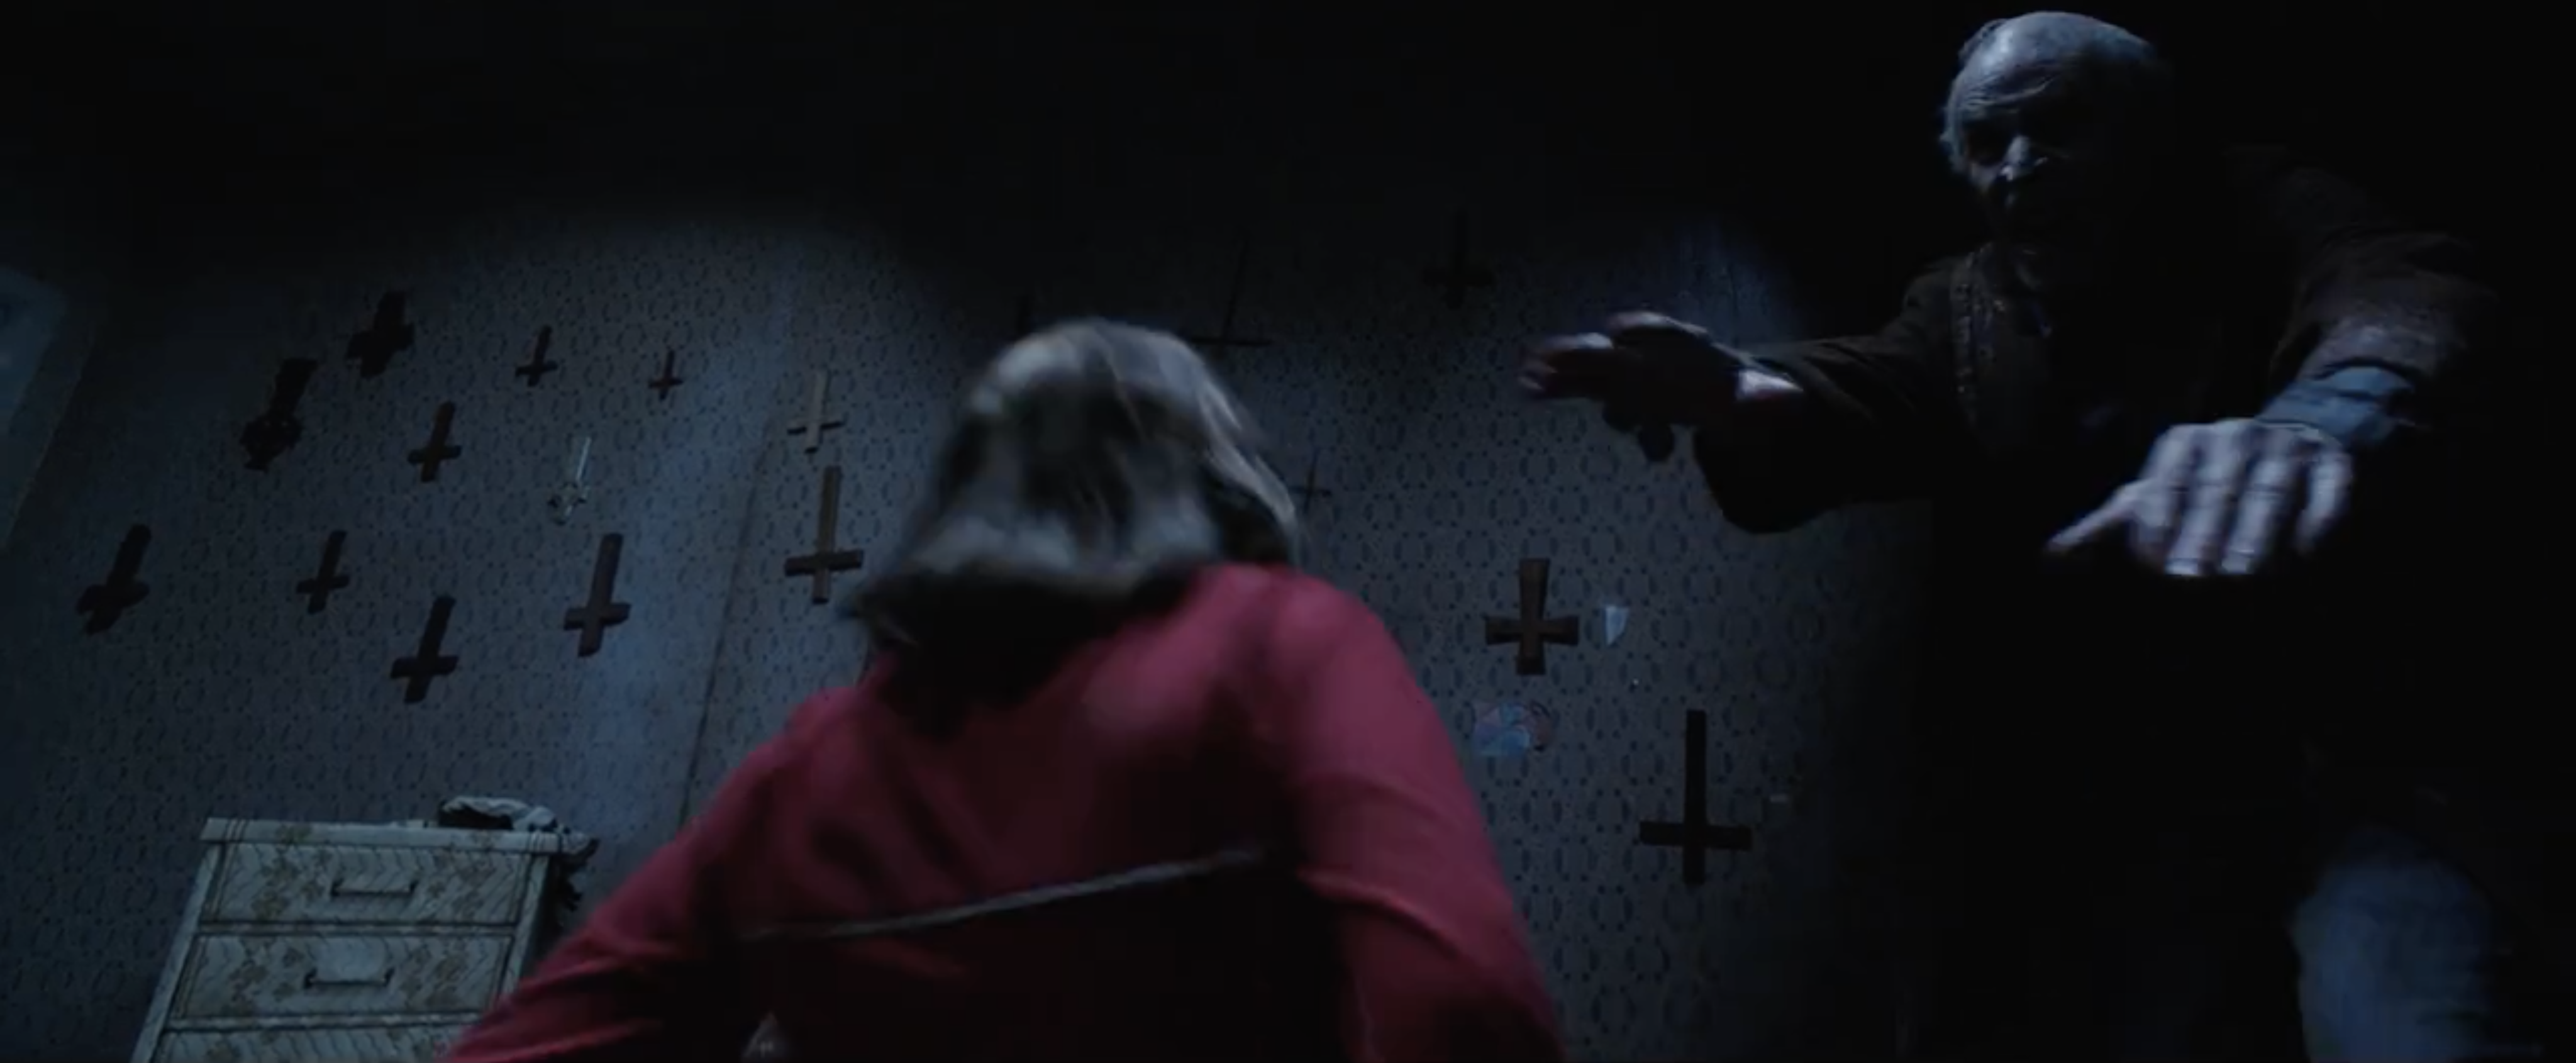 Amazing The Conjuring 2 Pictures & Backgrounds